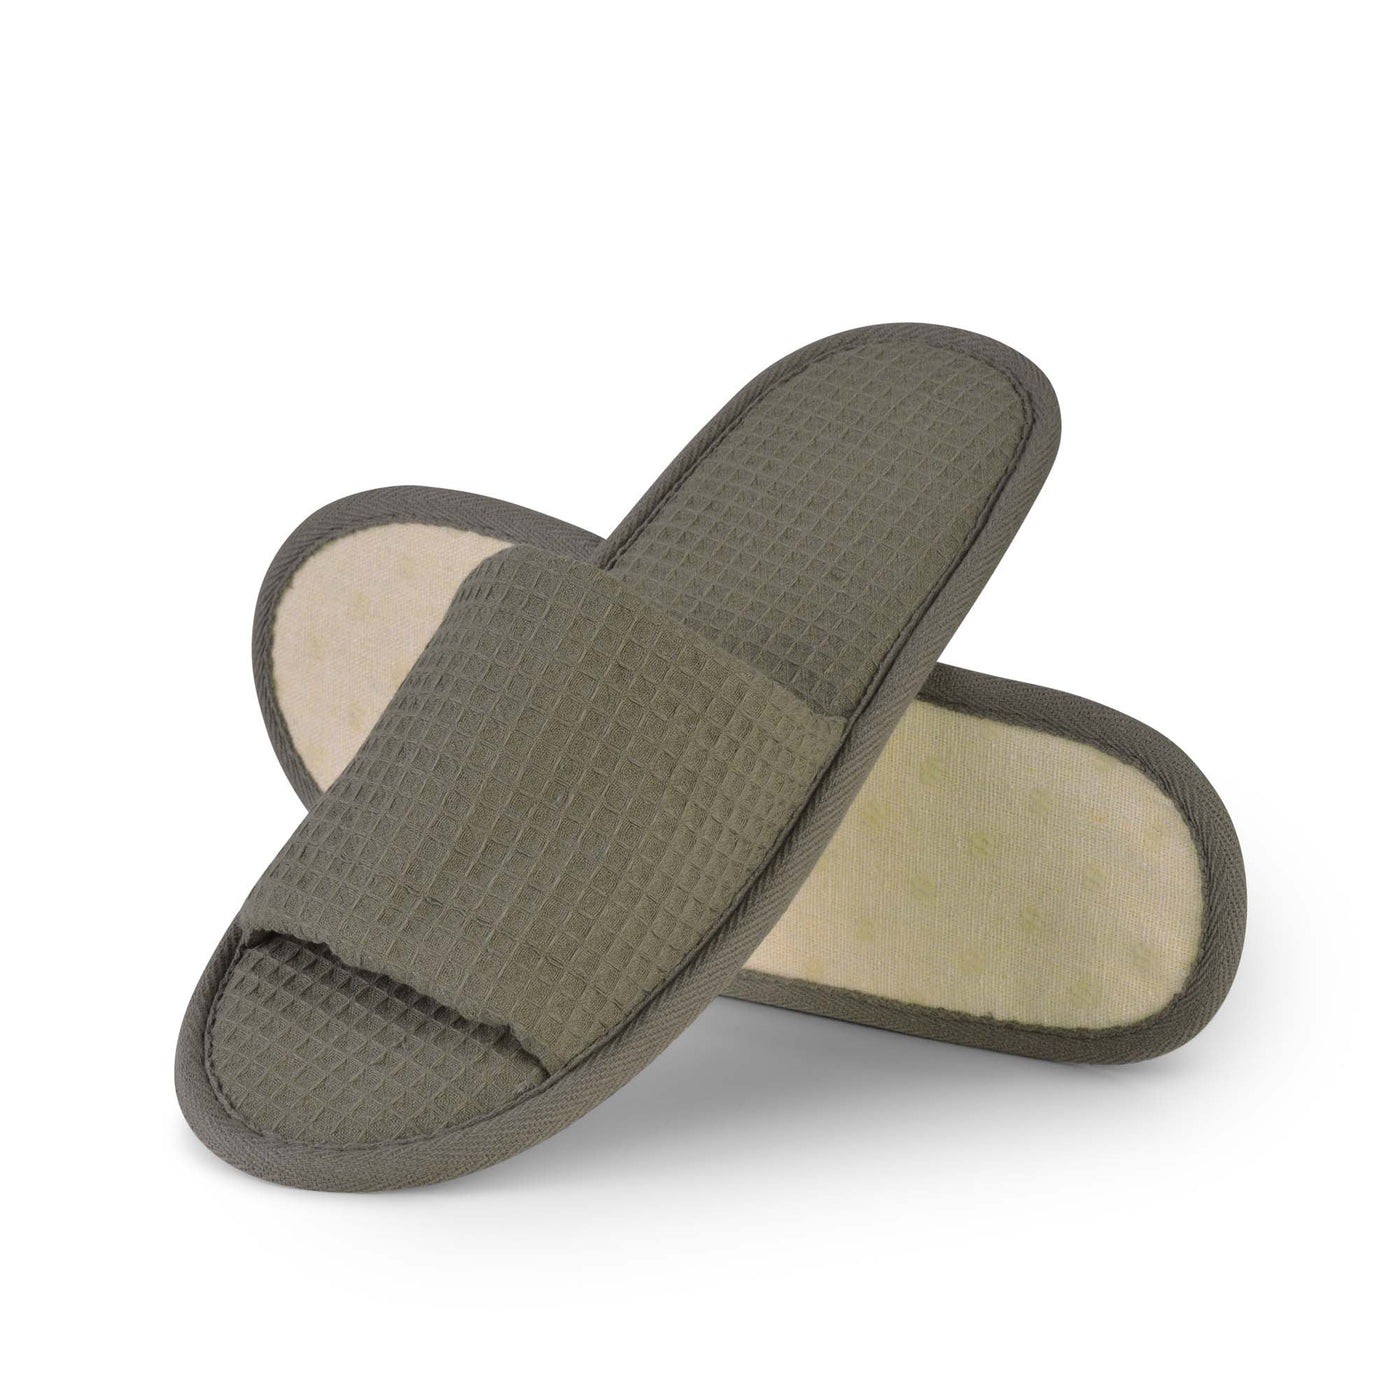 Lyndhurst Eco Friendly, Biodegradable, Plastic Free Waffle Open Toe Slippers Green - Pack of 100